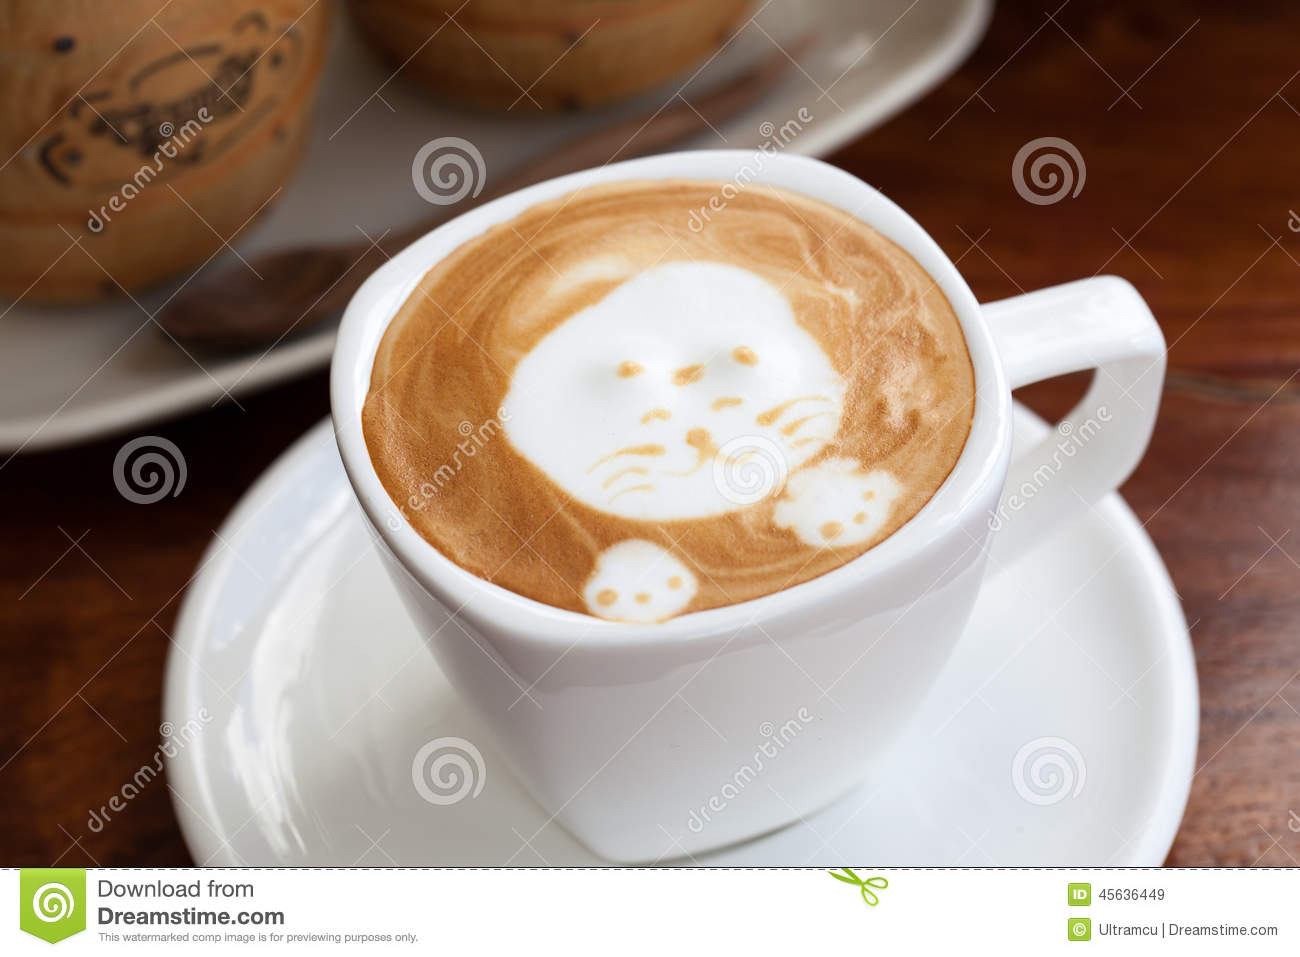 Cup Of Latte Art Coffee Stock Photo   Image  45636449